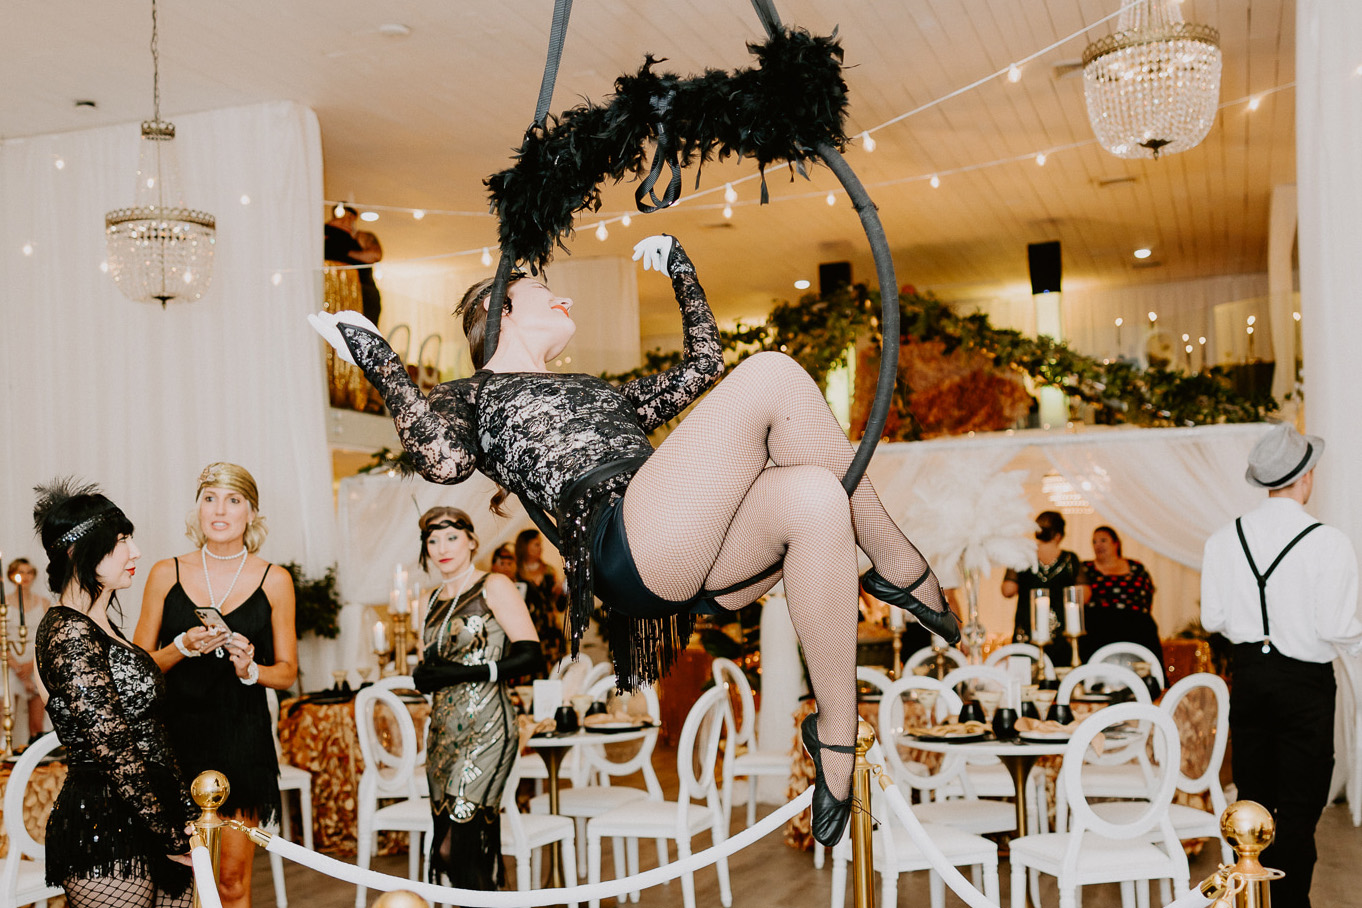 aerialist at a Roaring 20s themed event in Gracie Ballroom